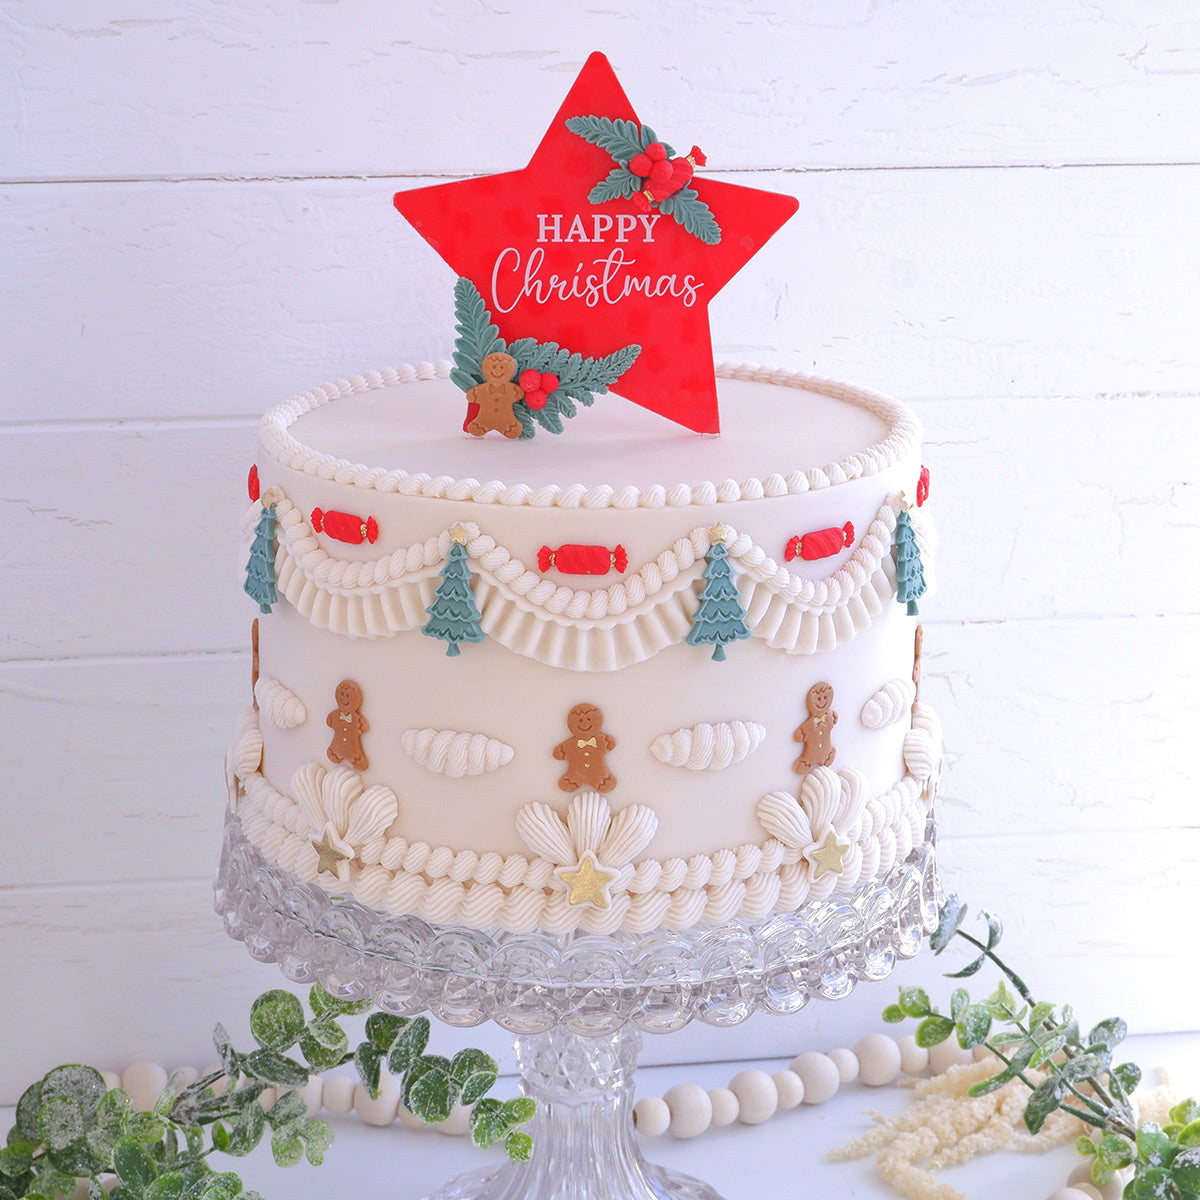 Happy Christmas Clear Acrylic Star Topper - White Wording